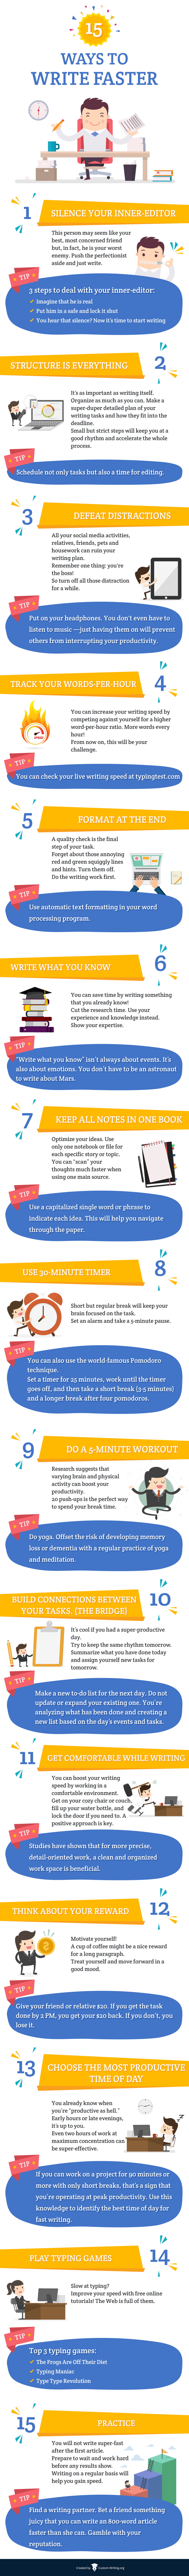 Infographic 15 Ways to Write Faster by Custom Writing